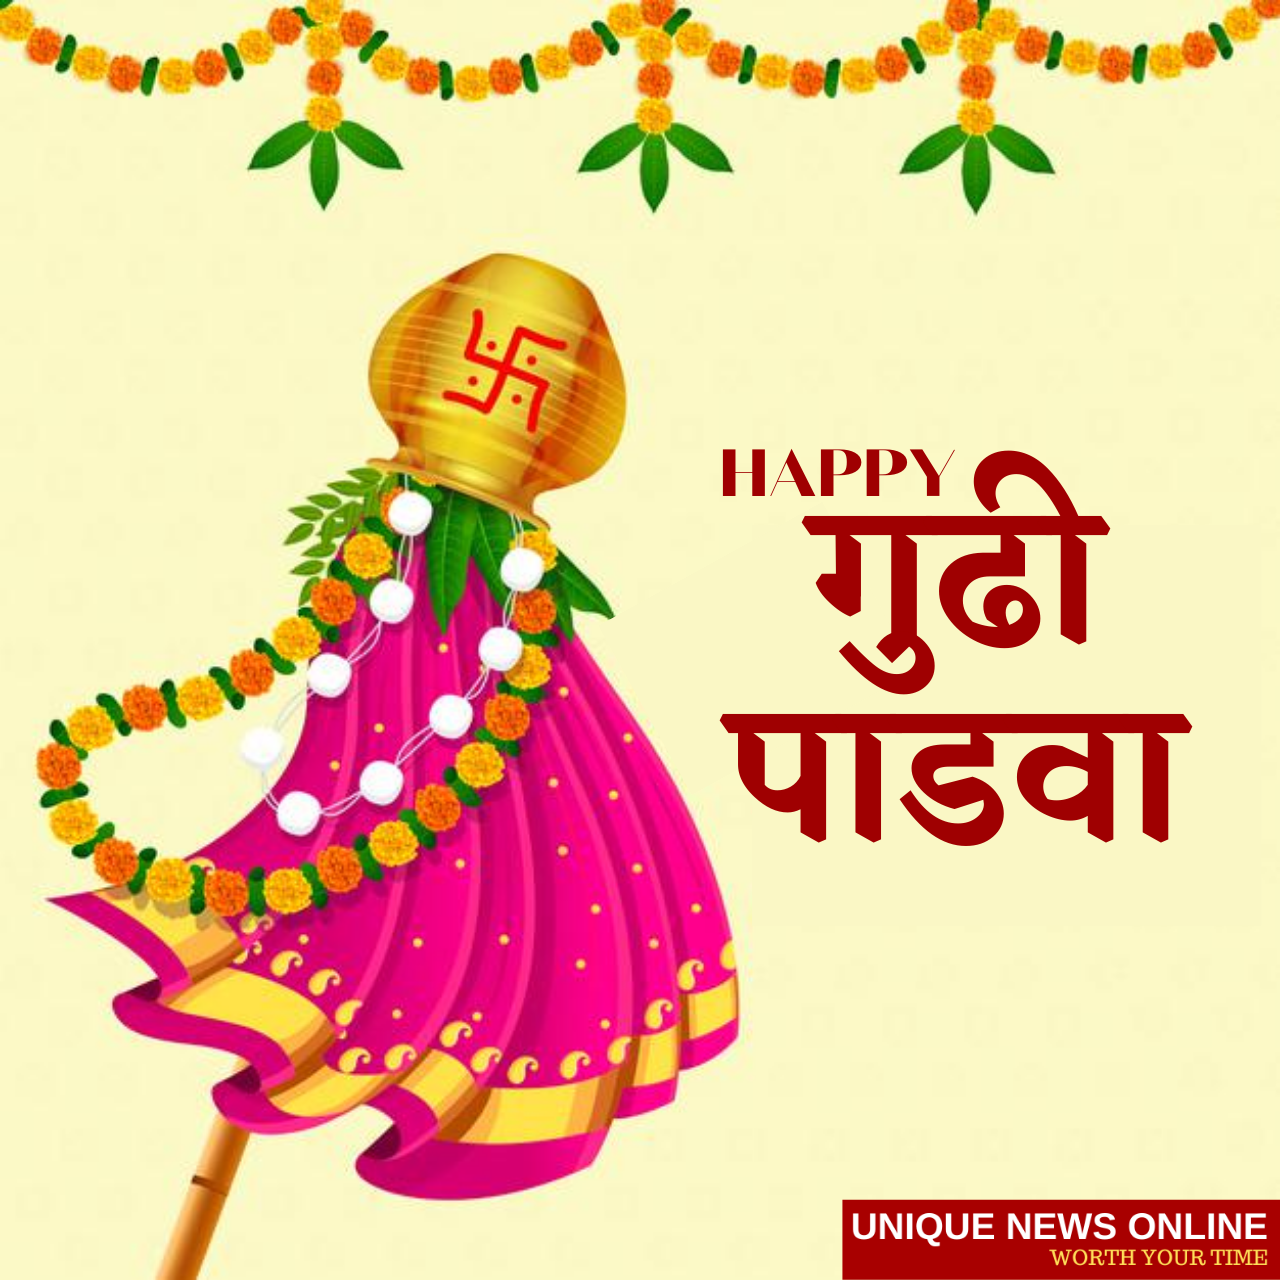 Happy Gudi Padwa 2021 wishes in Marathi Wishes, Messages, Greetings,  Quotes, and Images to share on